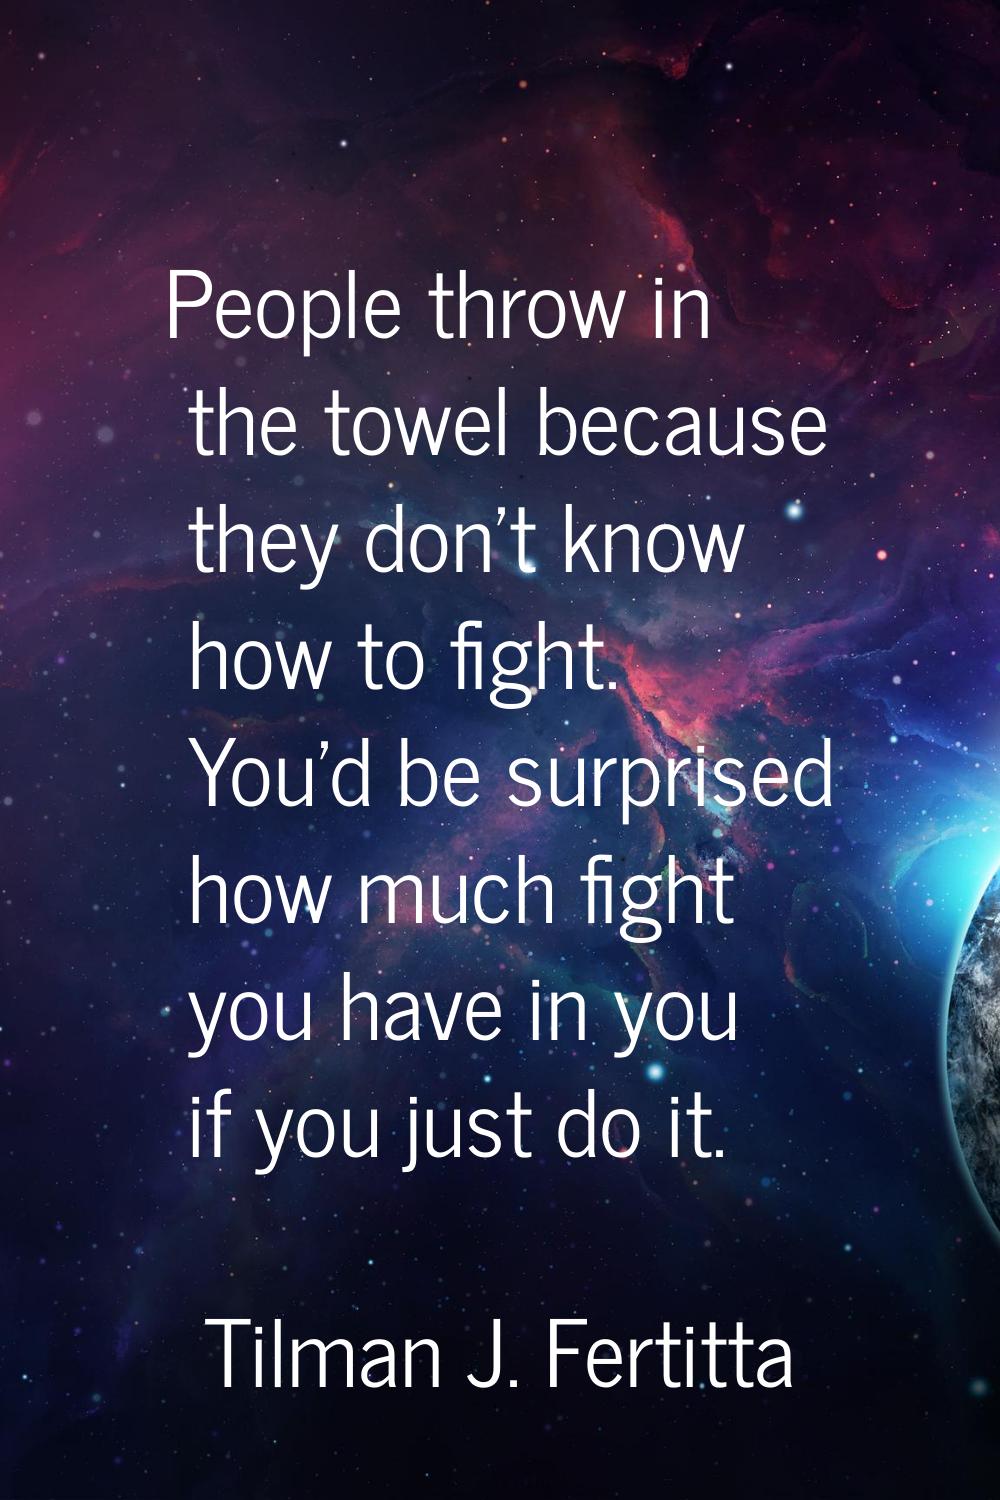 People throw in the towel because they don't know how to fight. You'd be surprised how much fight y